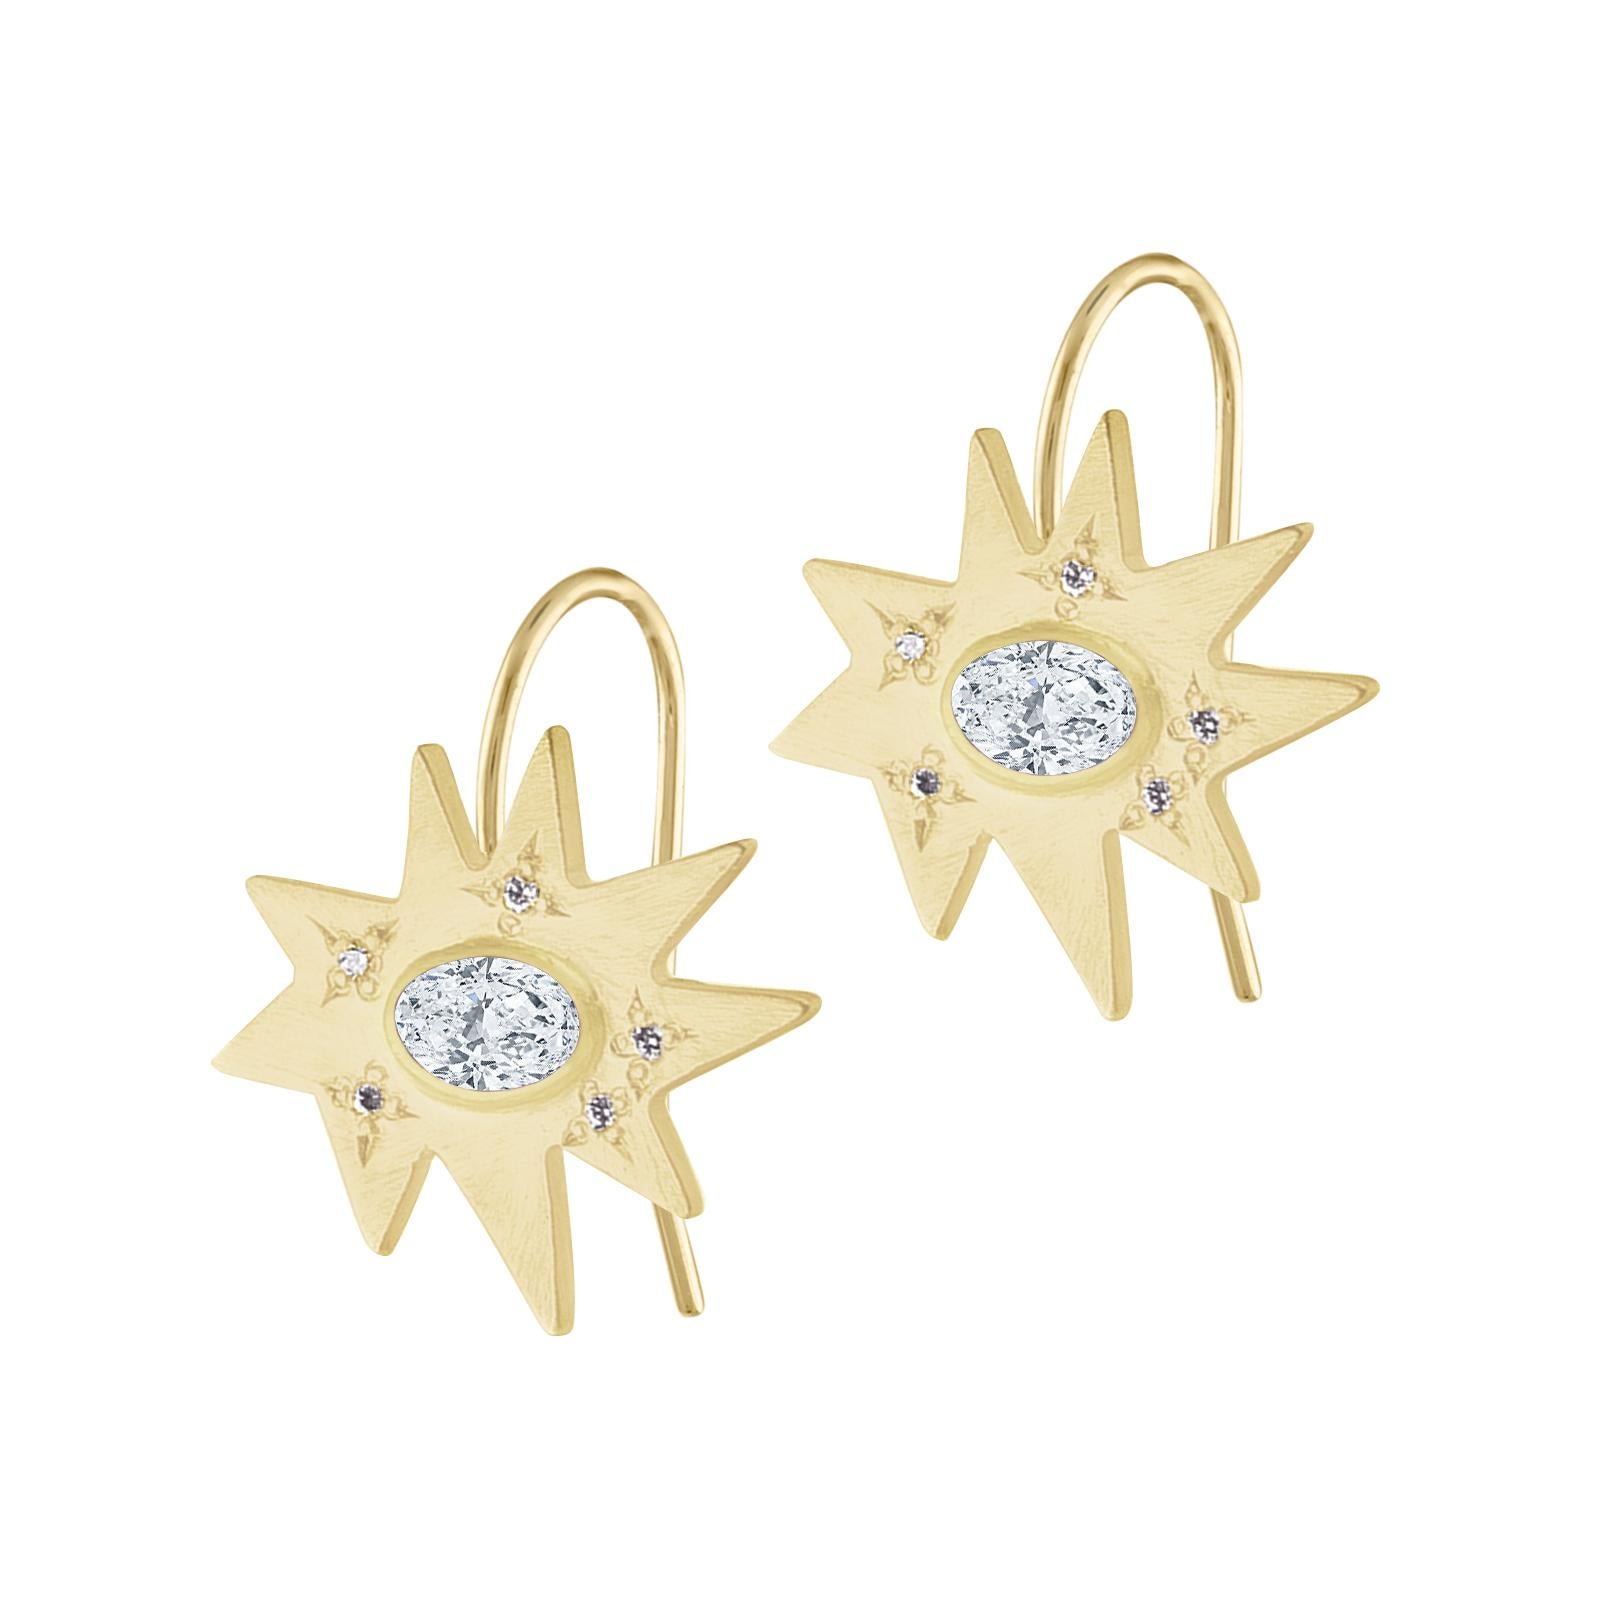 The perfect drop for any occasion. Our iconic matte gold organic shape Stellina star is affixed to a fixed French wire for an elegant look.  Featuring our signature diamond dusting and stunning diamond centers, these earrings are full of